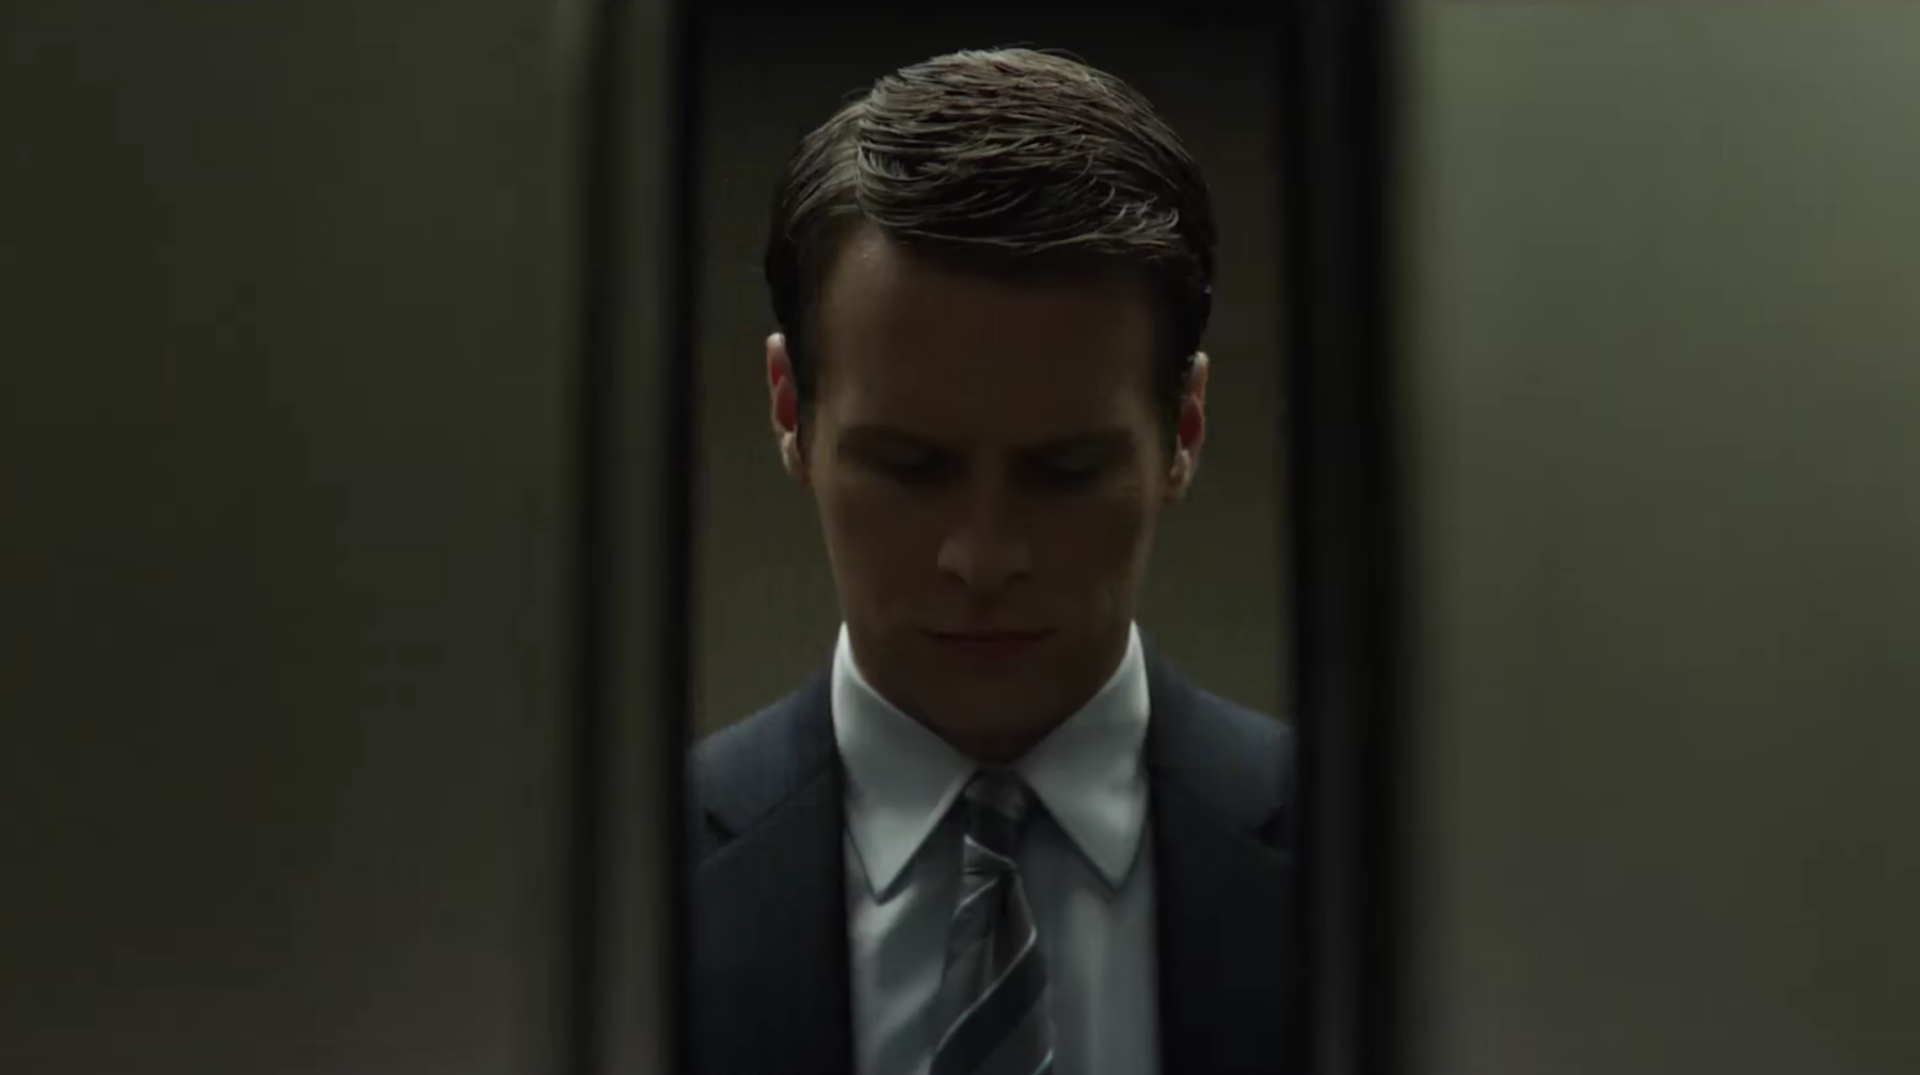 Netflix’s ‘Mindhunter’ teaser promises a tense and thrilling series